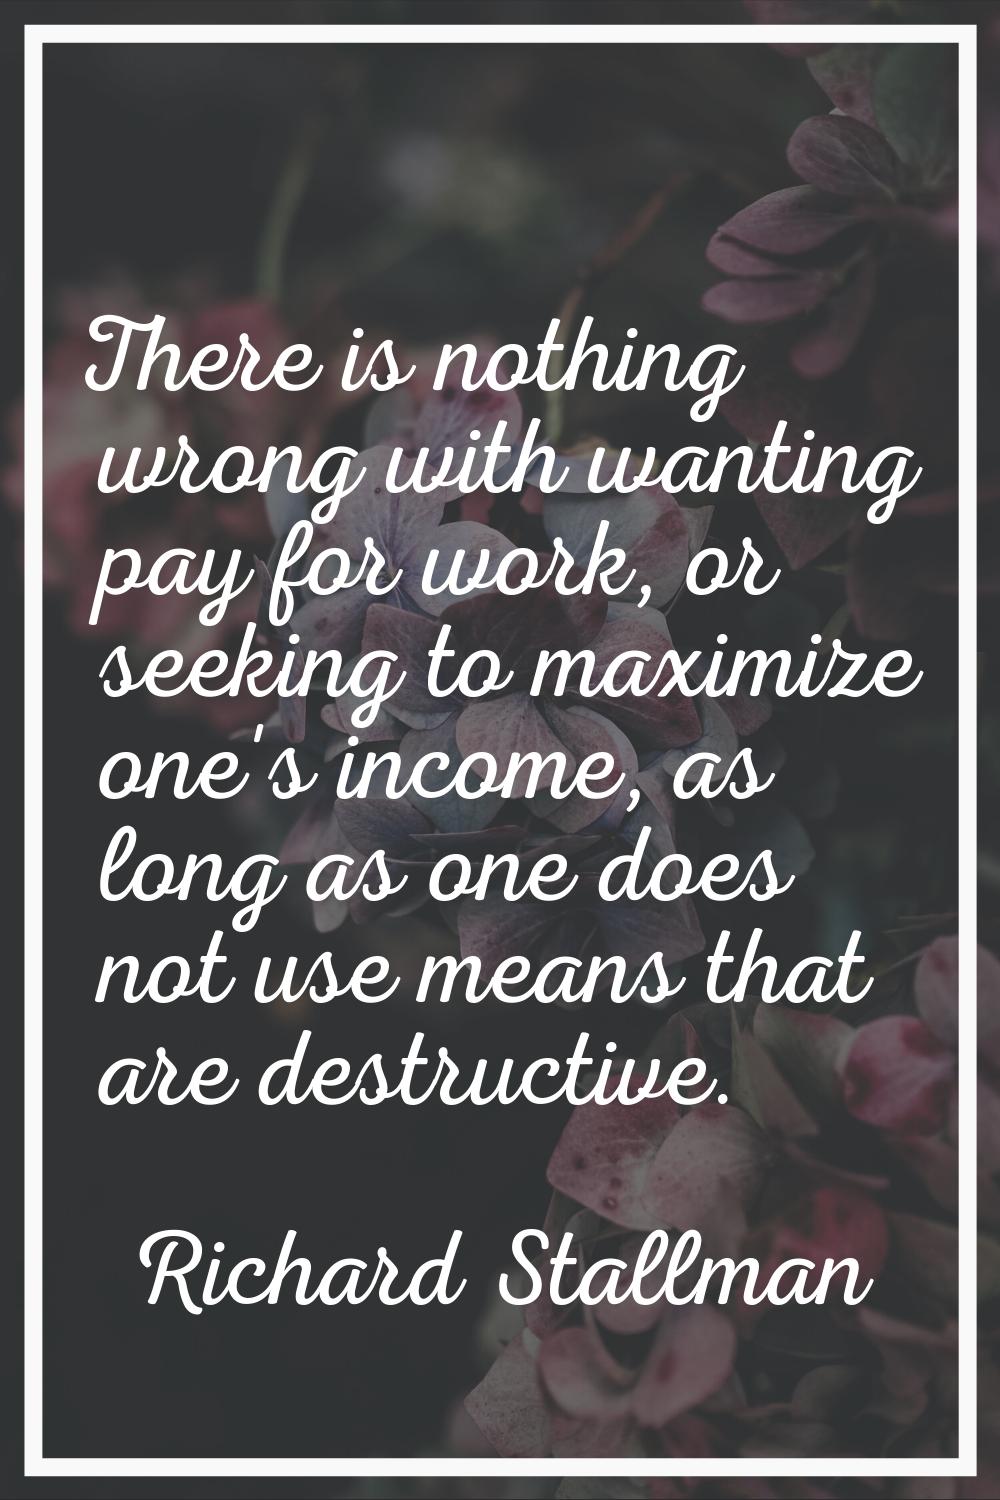 There is nothing wrong with wanting pay for work, or seeking to maximize one's income, as long as o